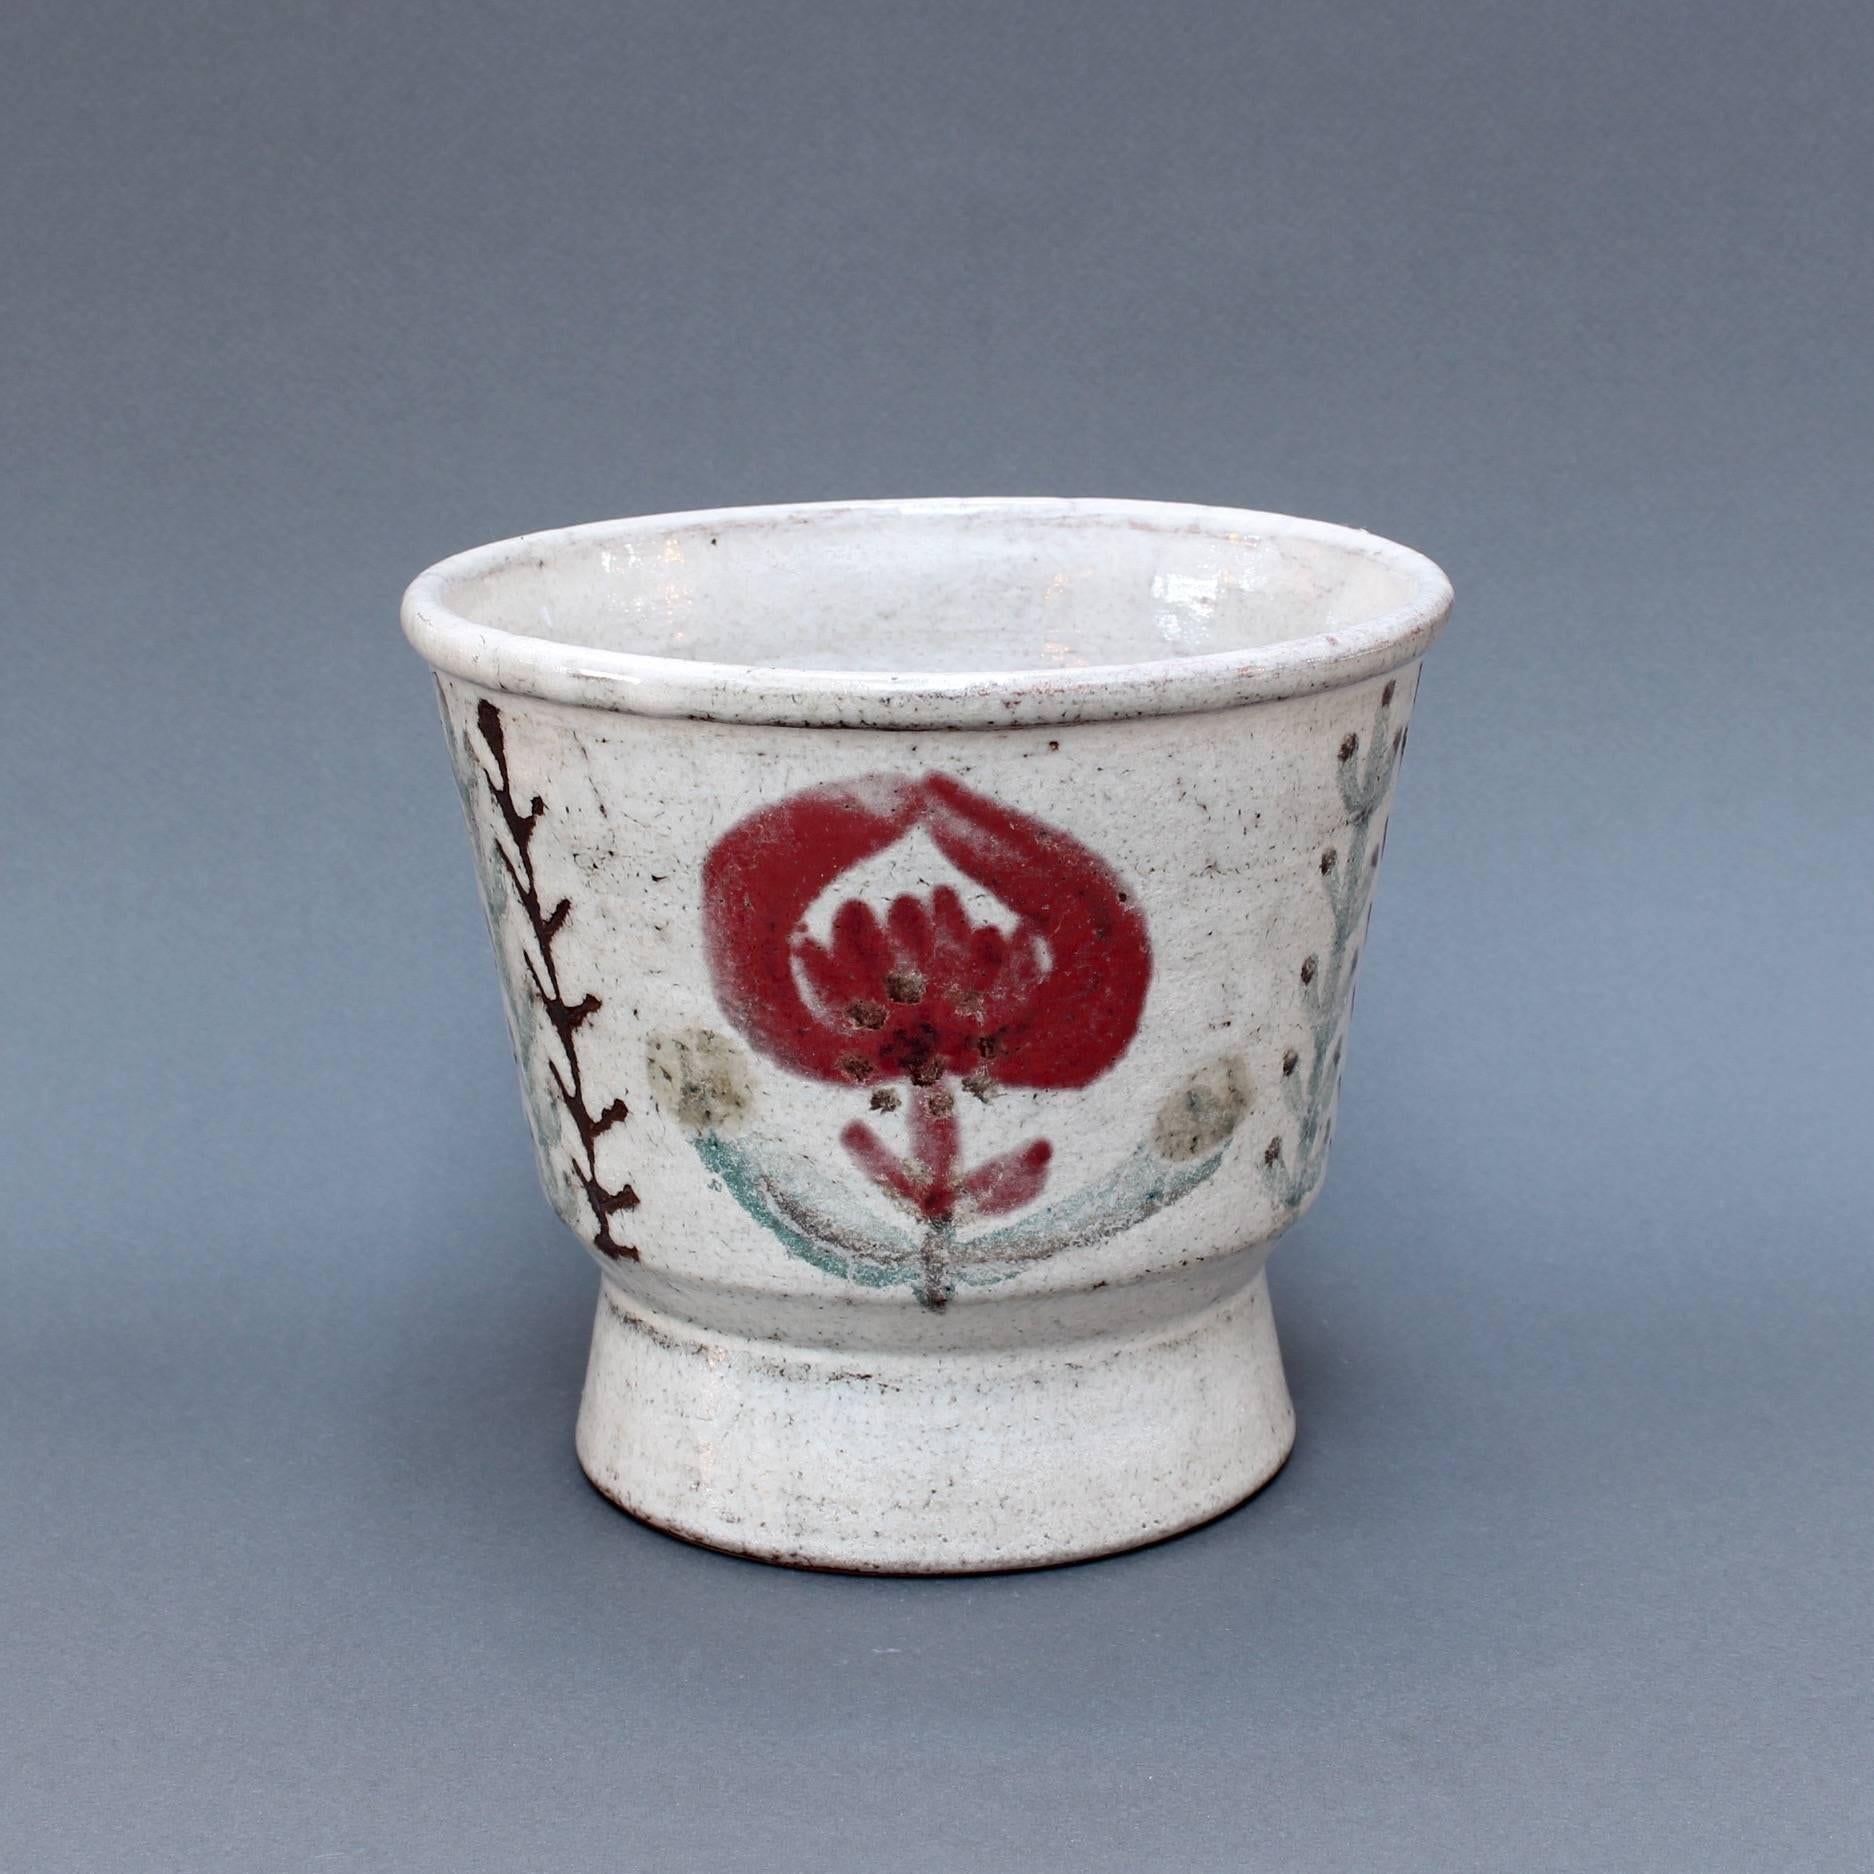 Ceramic plant pot (circa 1960s) by Gustave Reynaud (1915 - 1972) at Le Mûrier studios. A very charming planter with red flower motif on one side of the surface with a French rooster of the same colour on the other. The underlying glaze is a delicate